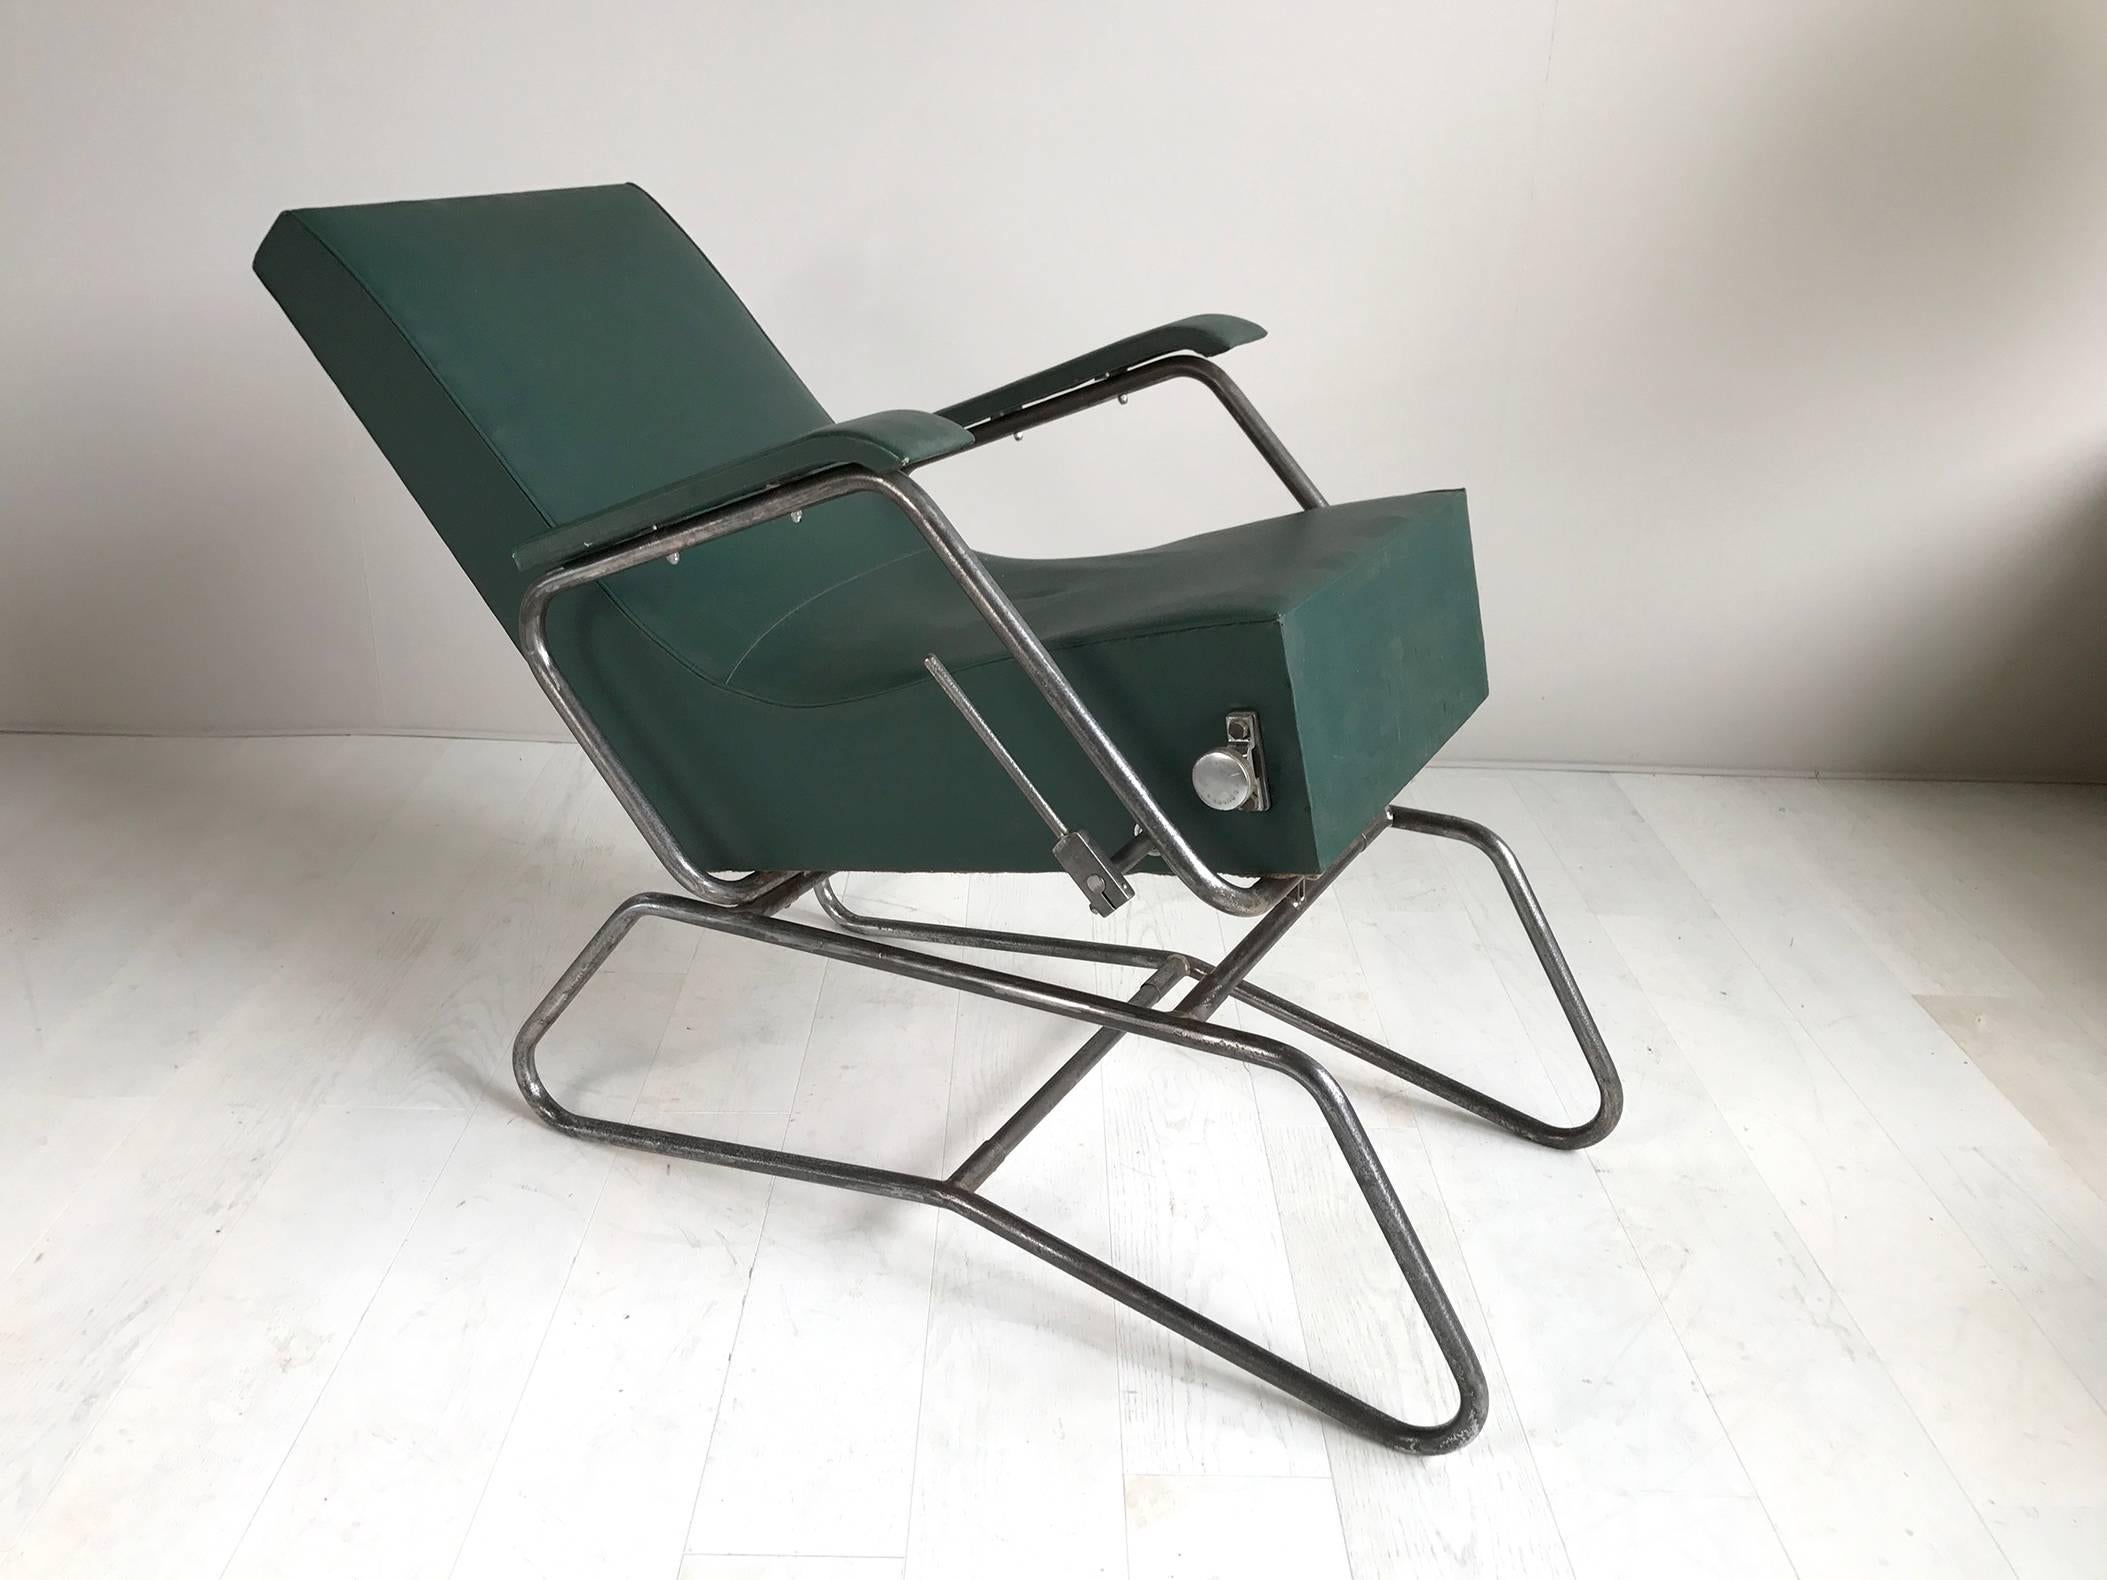 French Lounge Chair with System, Dupré-Perrin / Maurice Barret, France, 1930